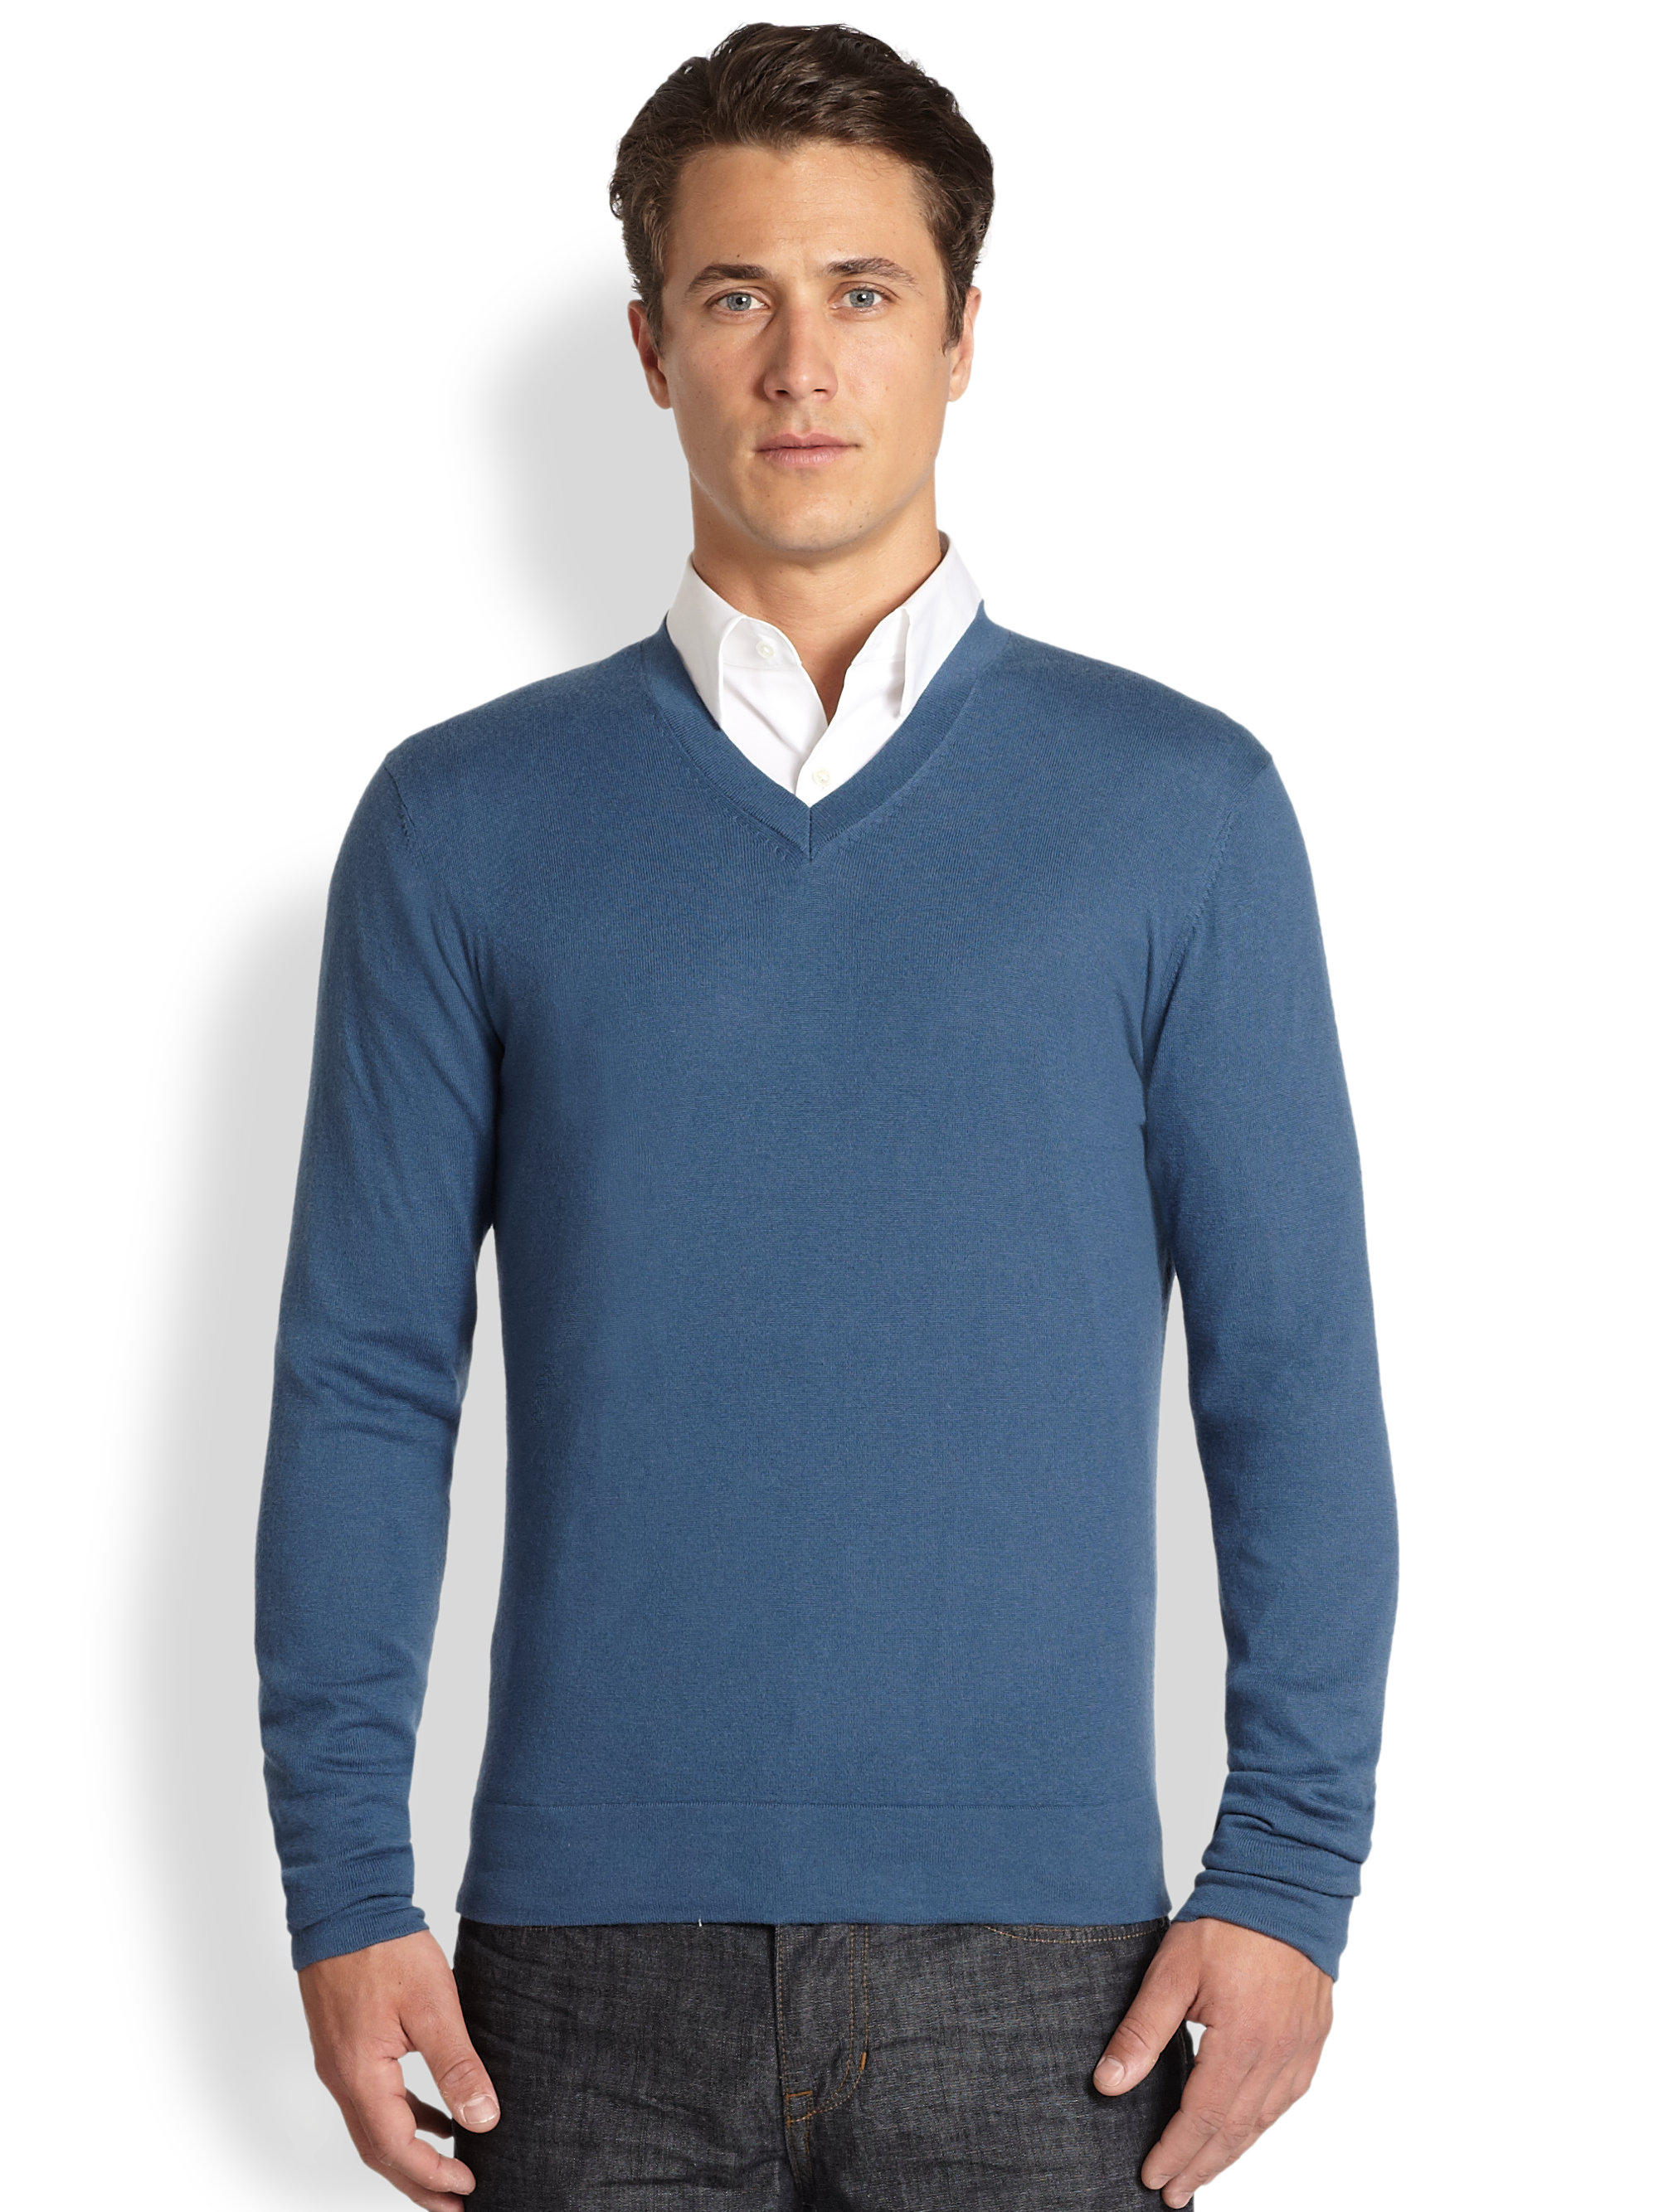 Lyst - Theory Leiman V-neck Cashmere & Cotton Sweater in Blue for Men